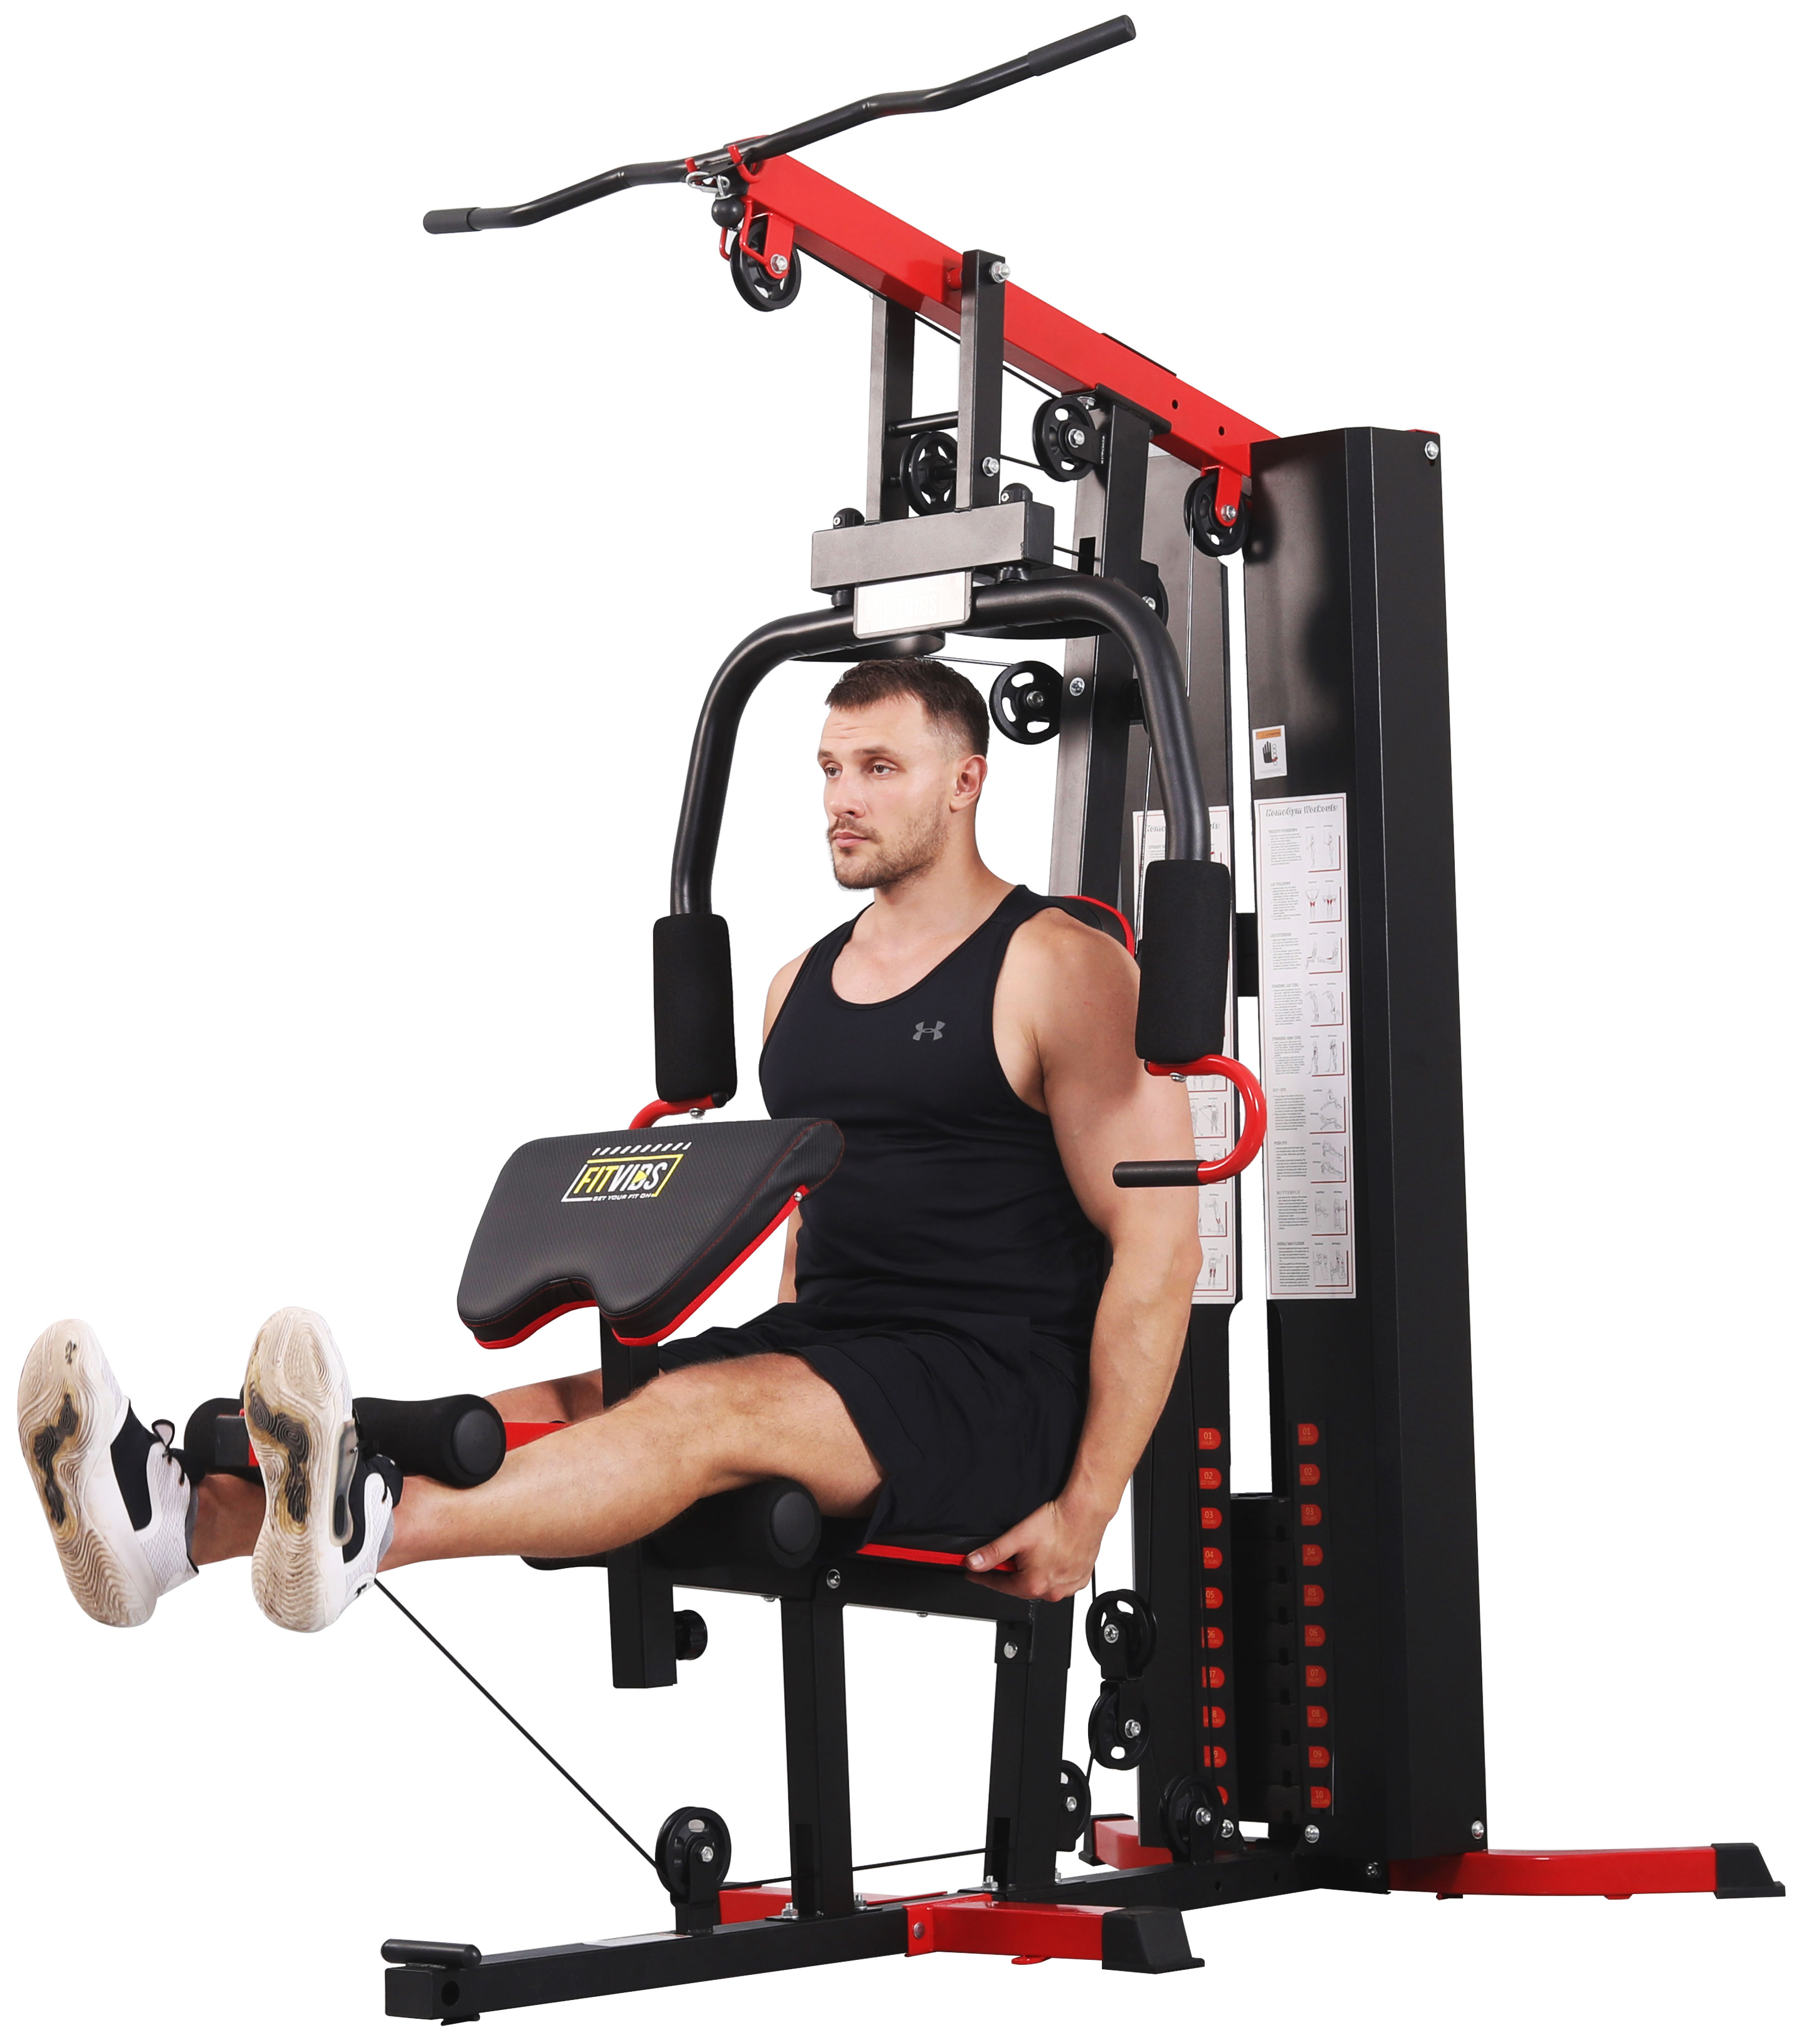 Fitvids LX750 Home Gym System Workout Station with 330 Lbs of Resistance, 122.5 Lbs Weight Stack, One Station, Comes with Installation Instruction Video, Ships in 5 Boxes - image 5 of 13